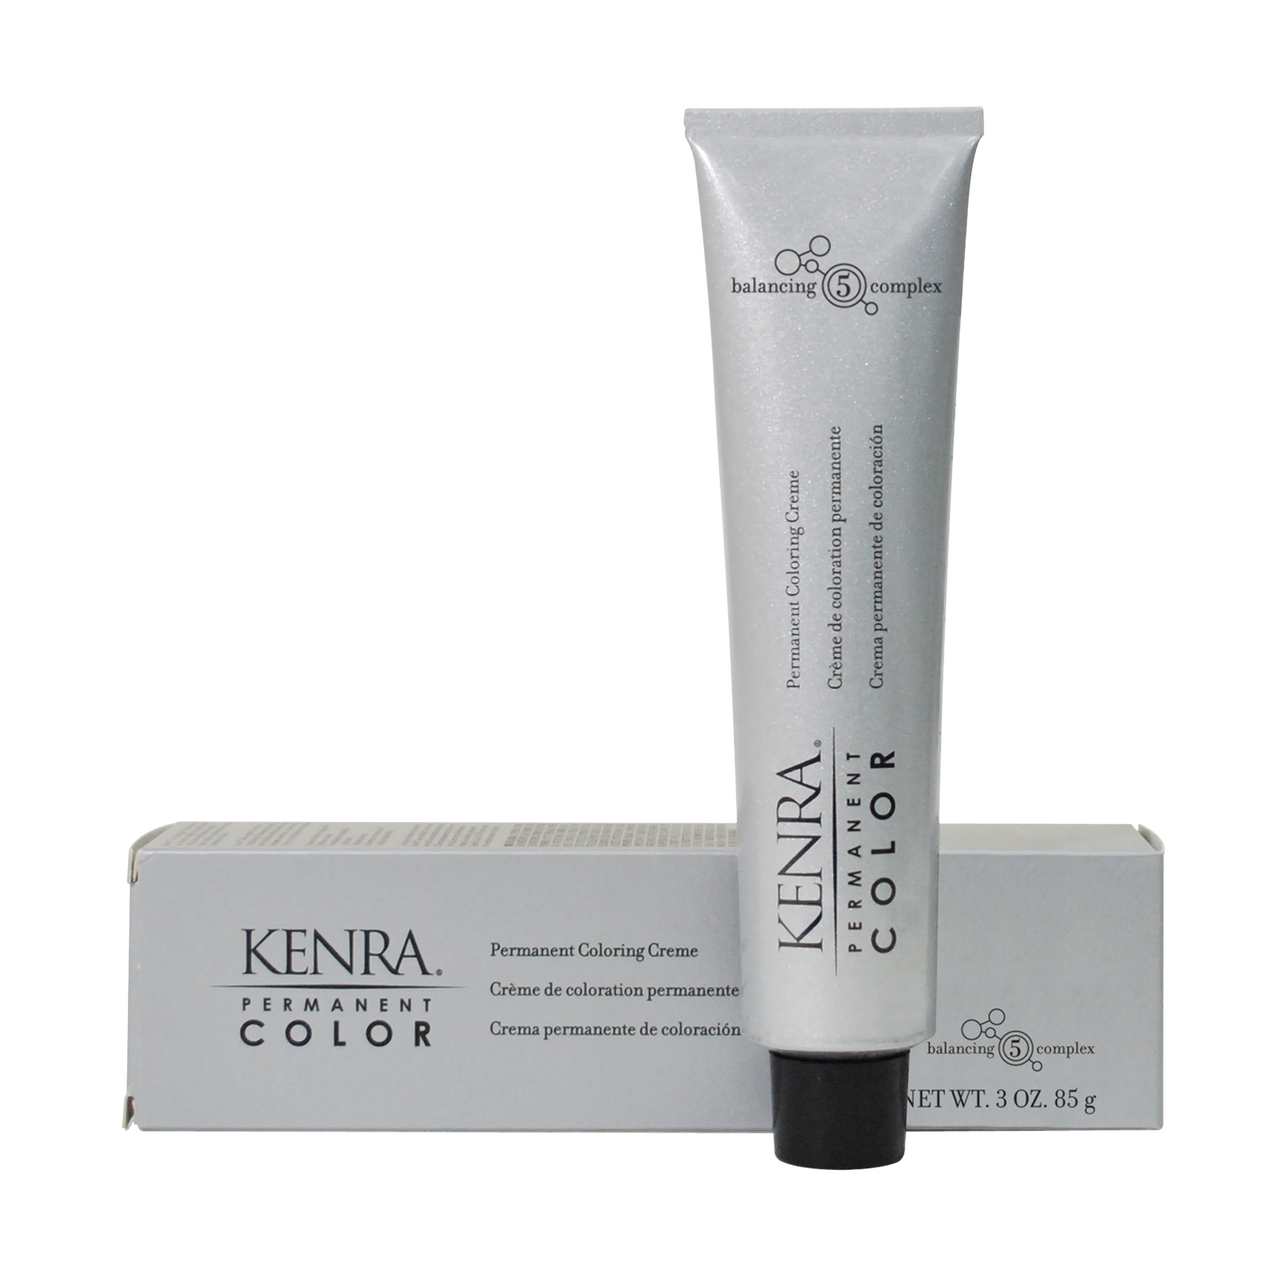 Kenra Professional Copper Booster